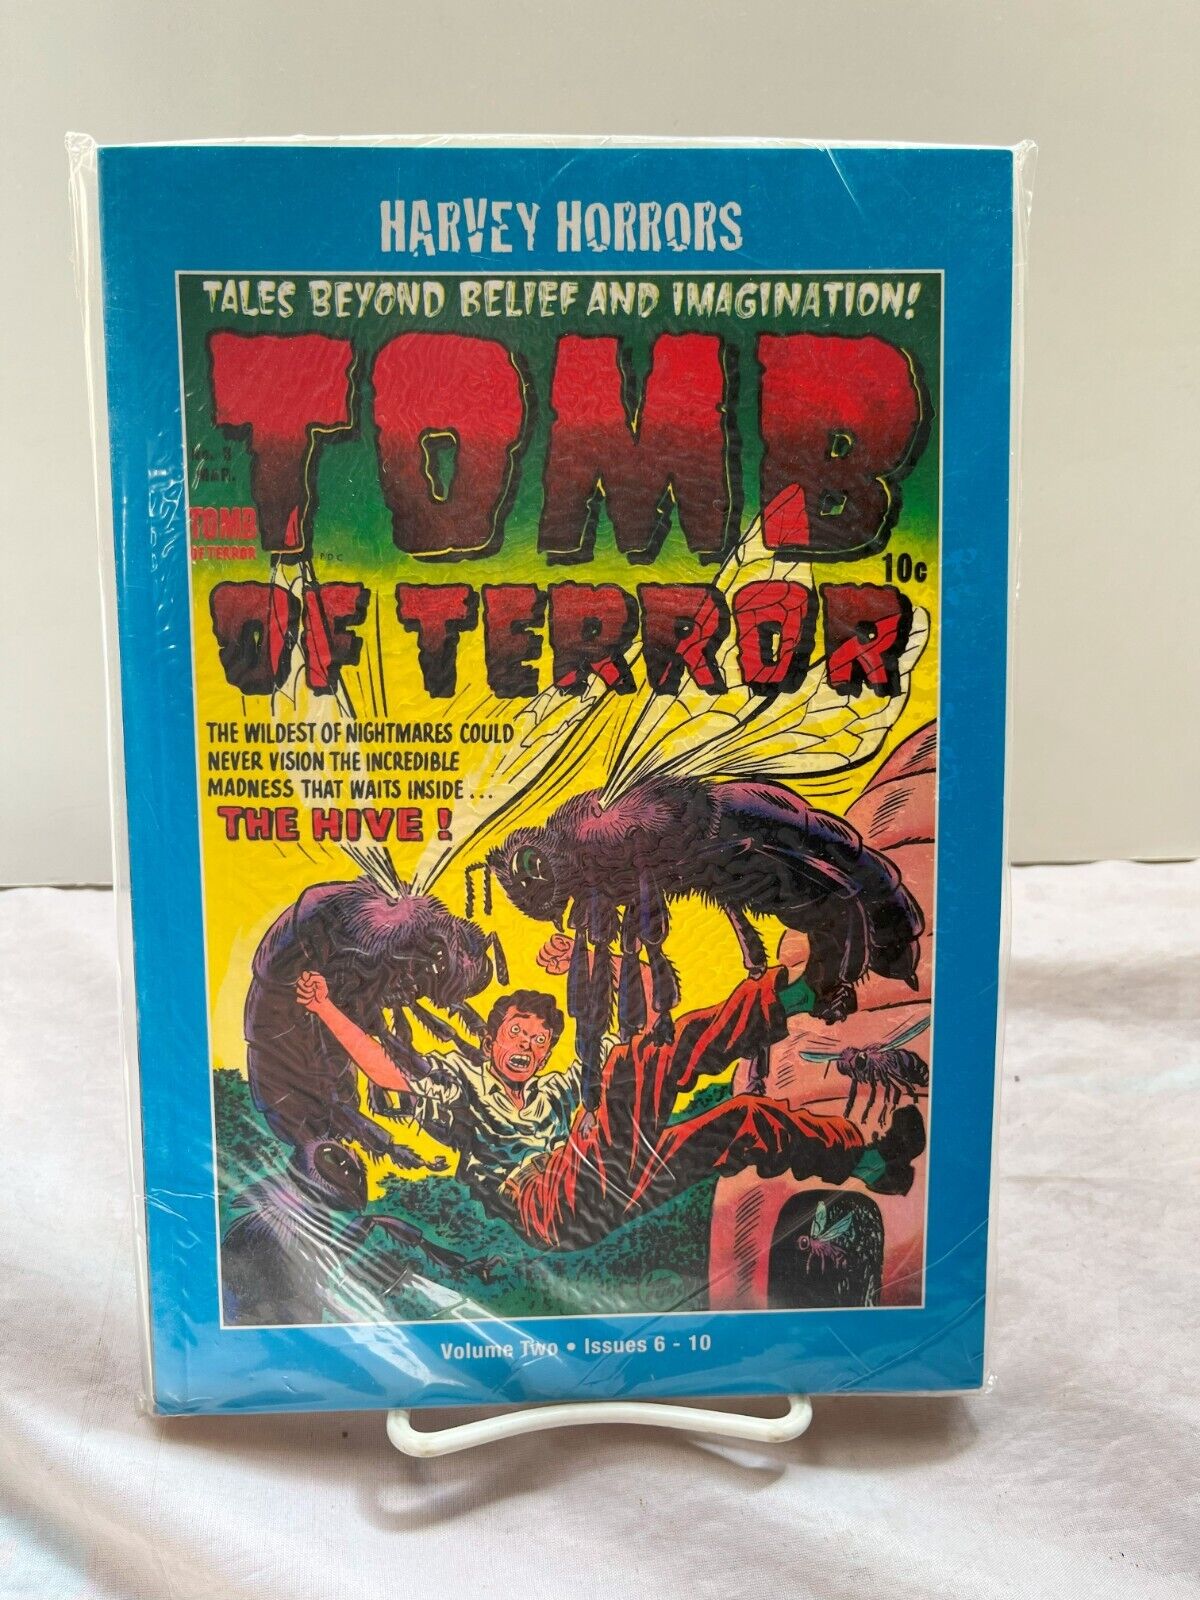 TOMB OF TERROR Harvey Horrors Volume 2 Issues #6-10 Softcover PS Artbooks